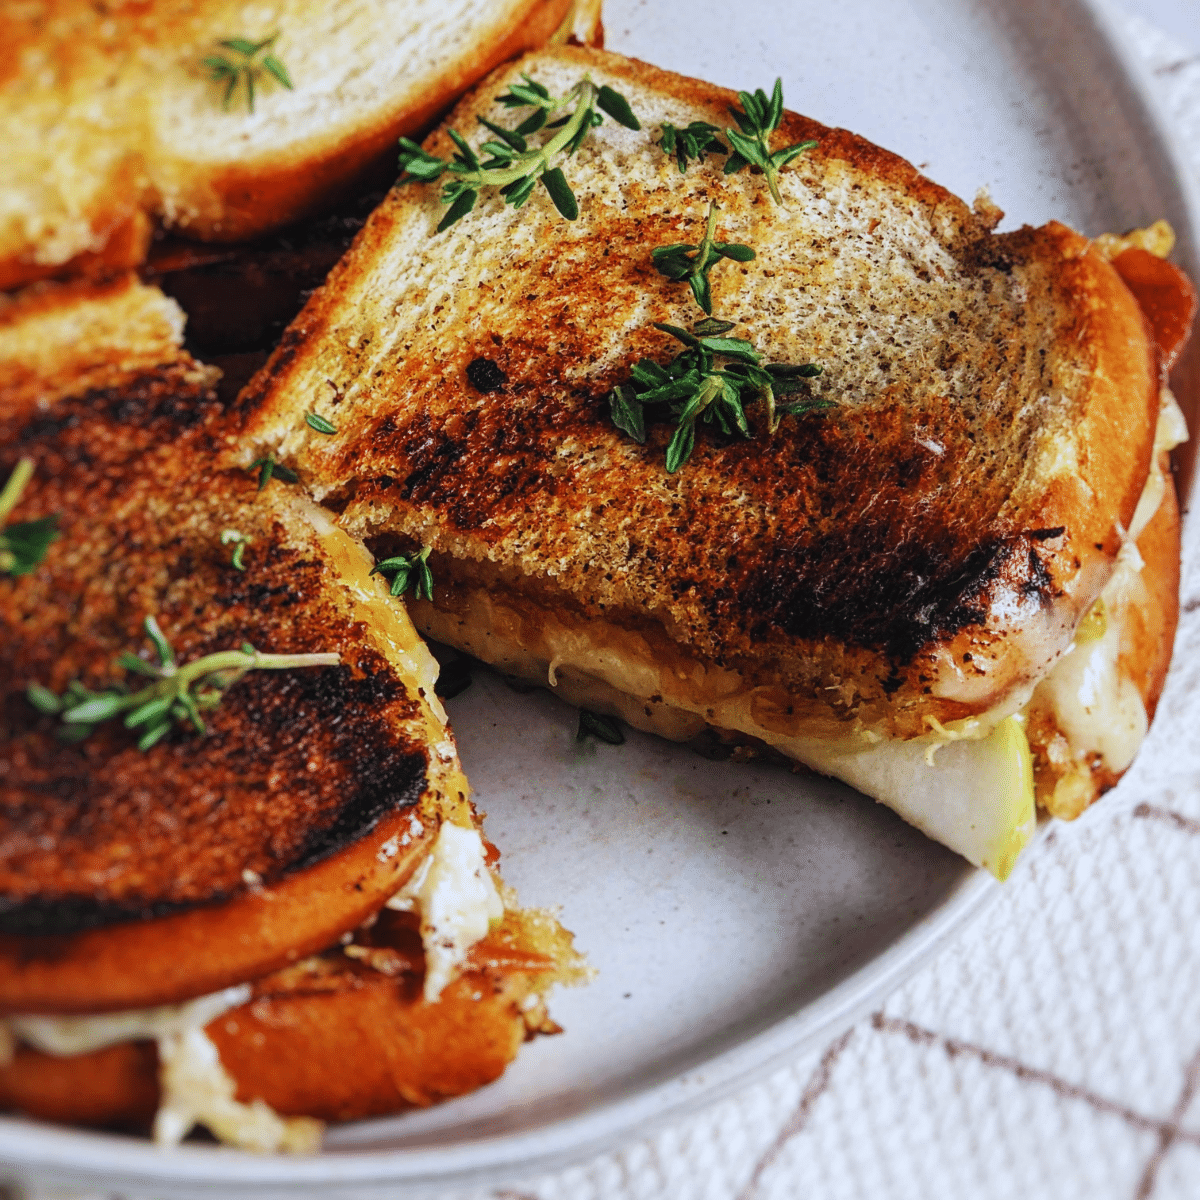 apple grilled cheese sandwich with brie gouda crispy prosciutto and apple cider onion jam. recipe found on mandyolive.com